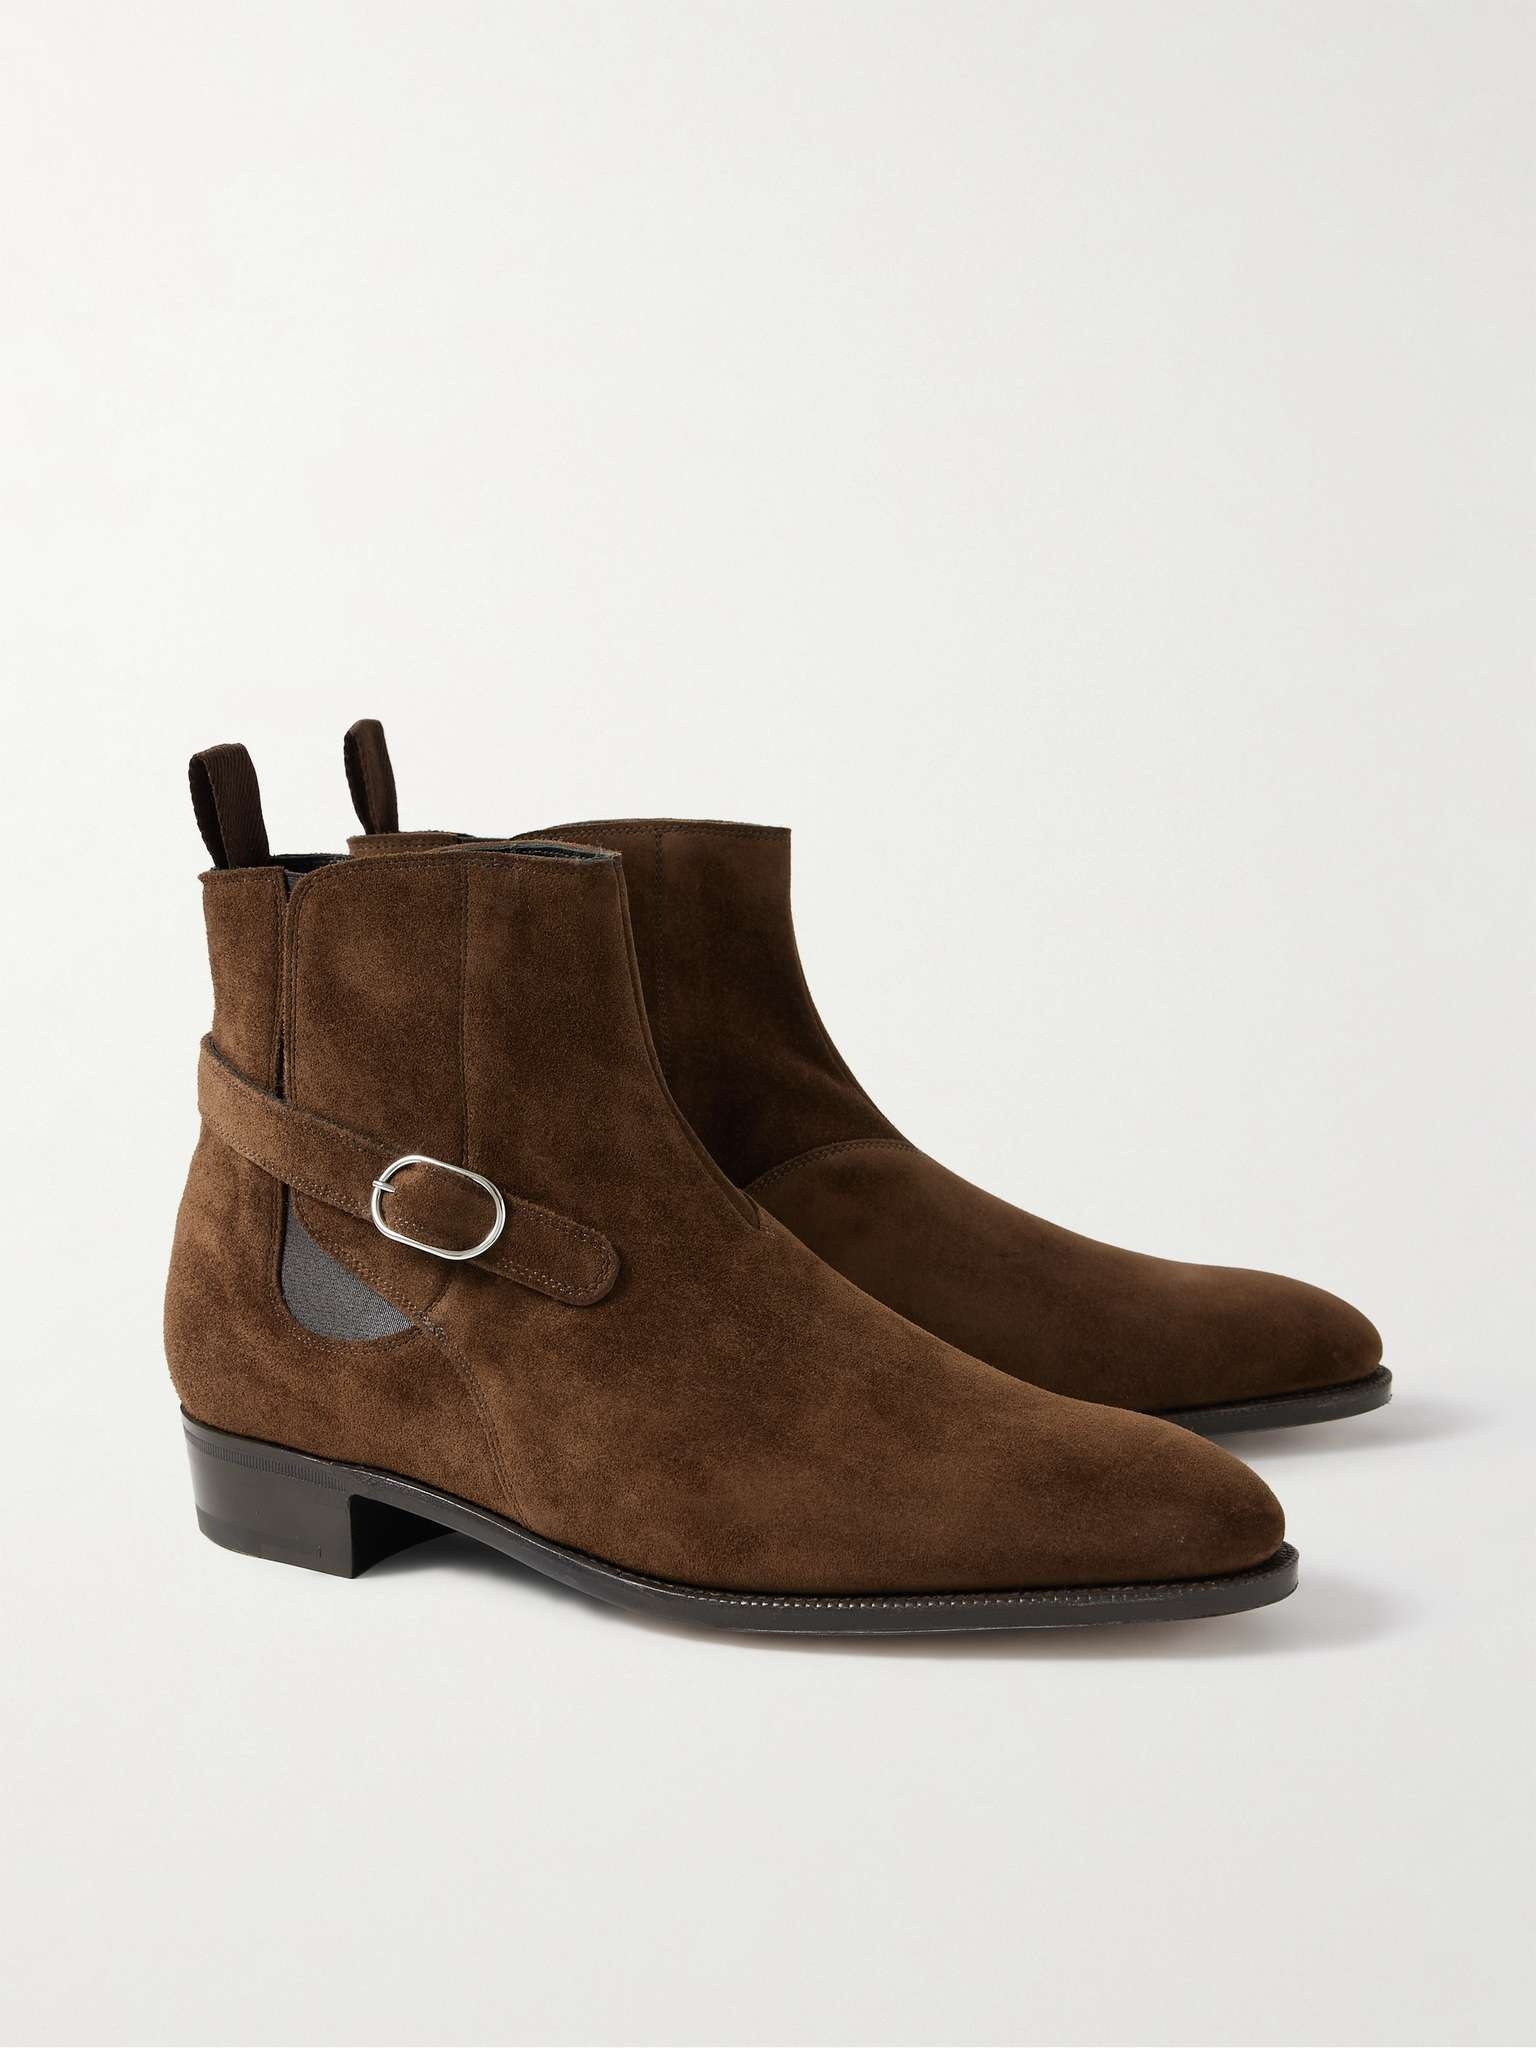 Masons Buckled Suede Chelsea Boots - 4